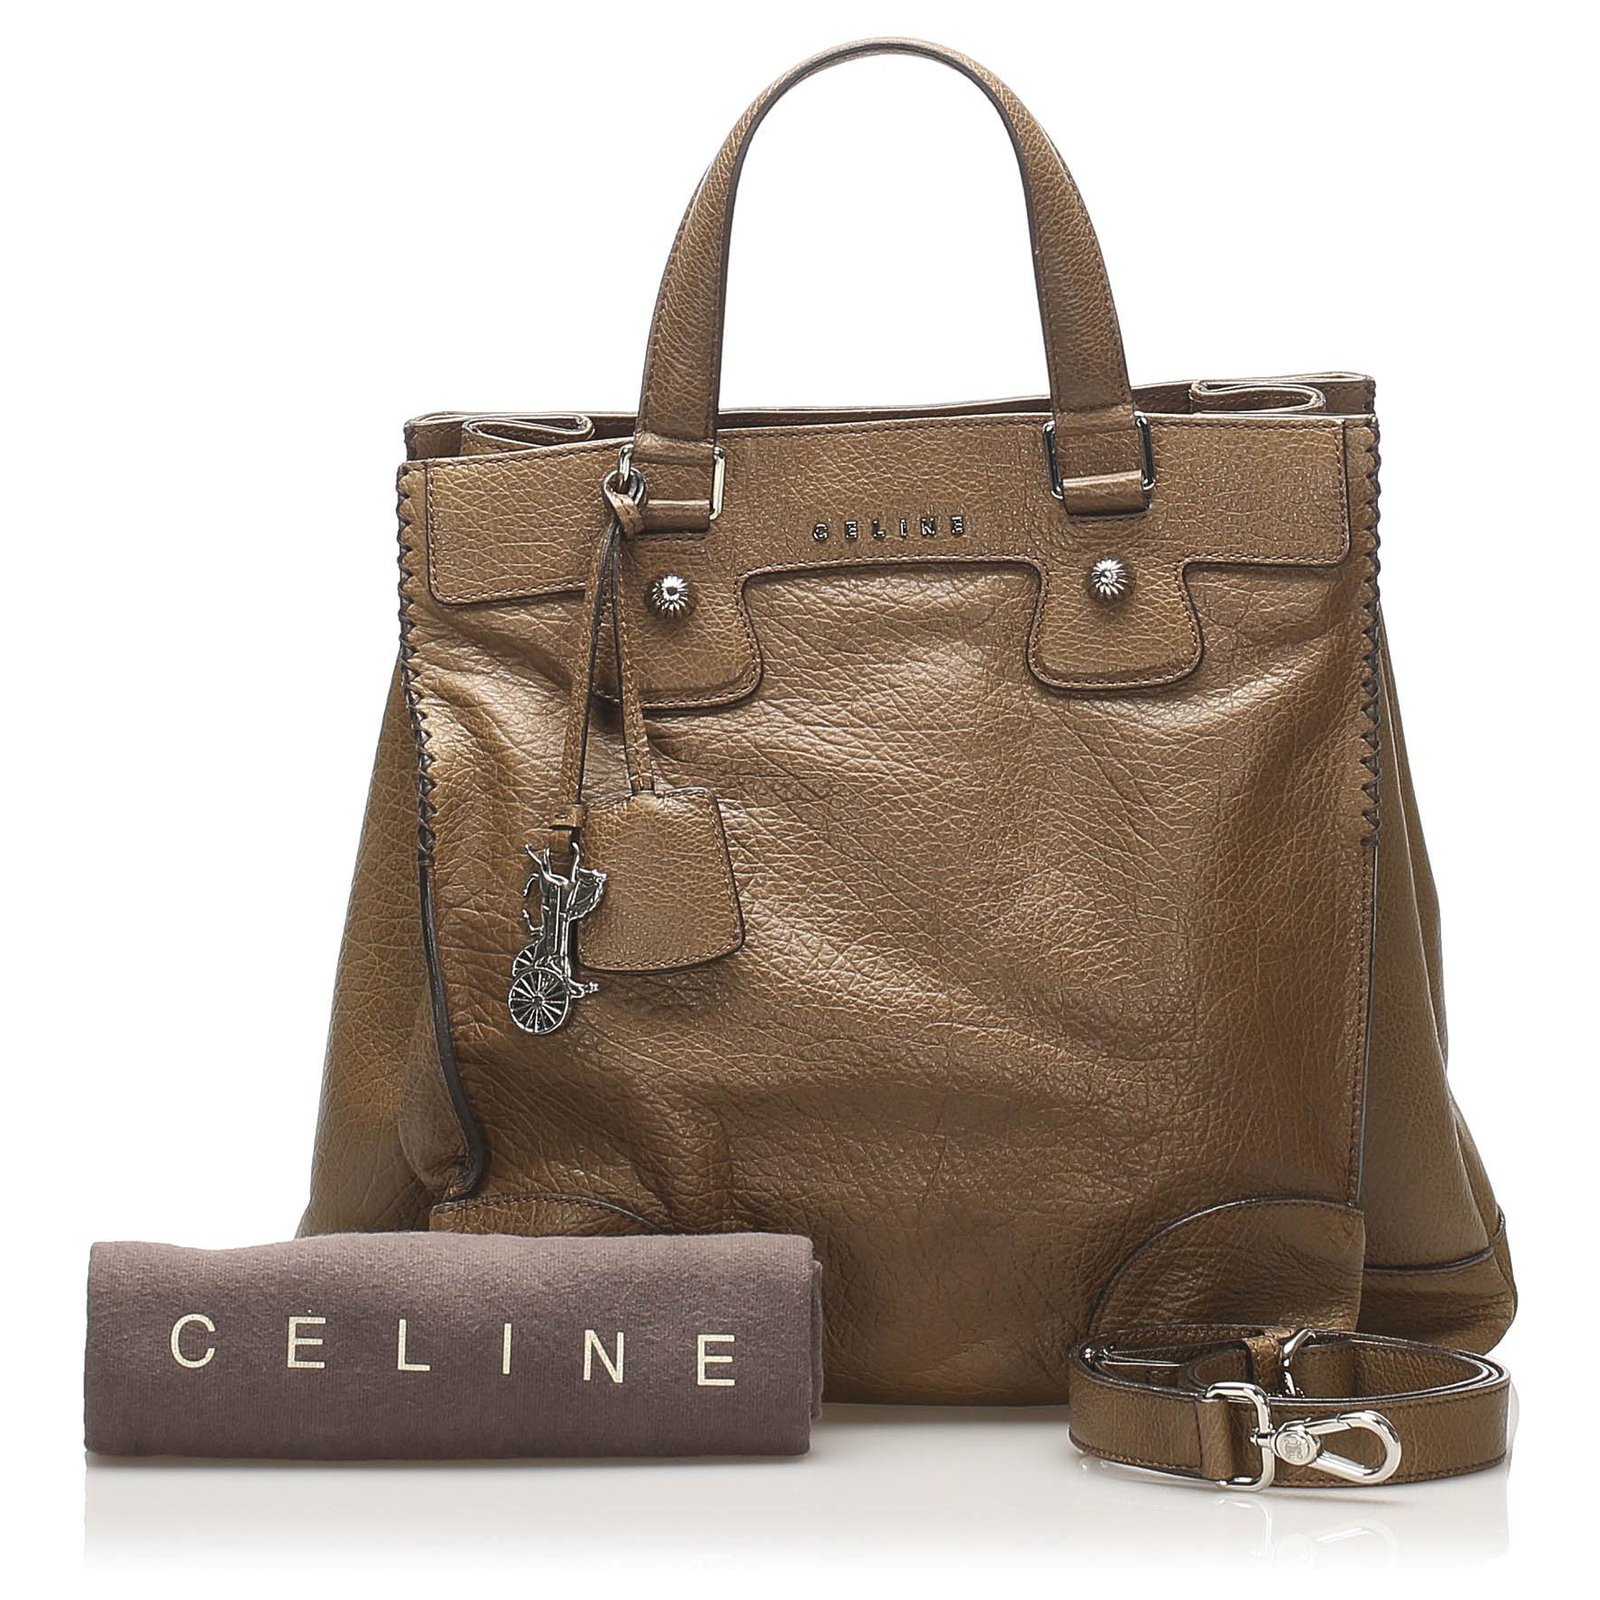 Celine - Authenticated Mules - Leather Brown Plain for Women, Good Condition